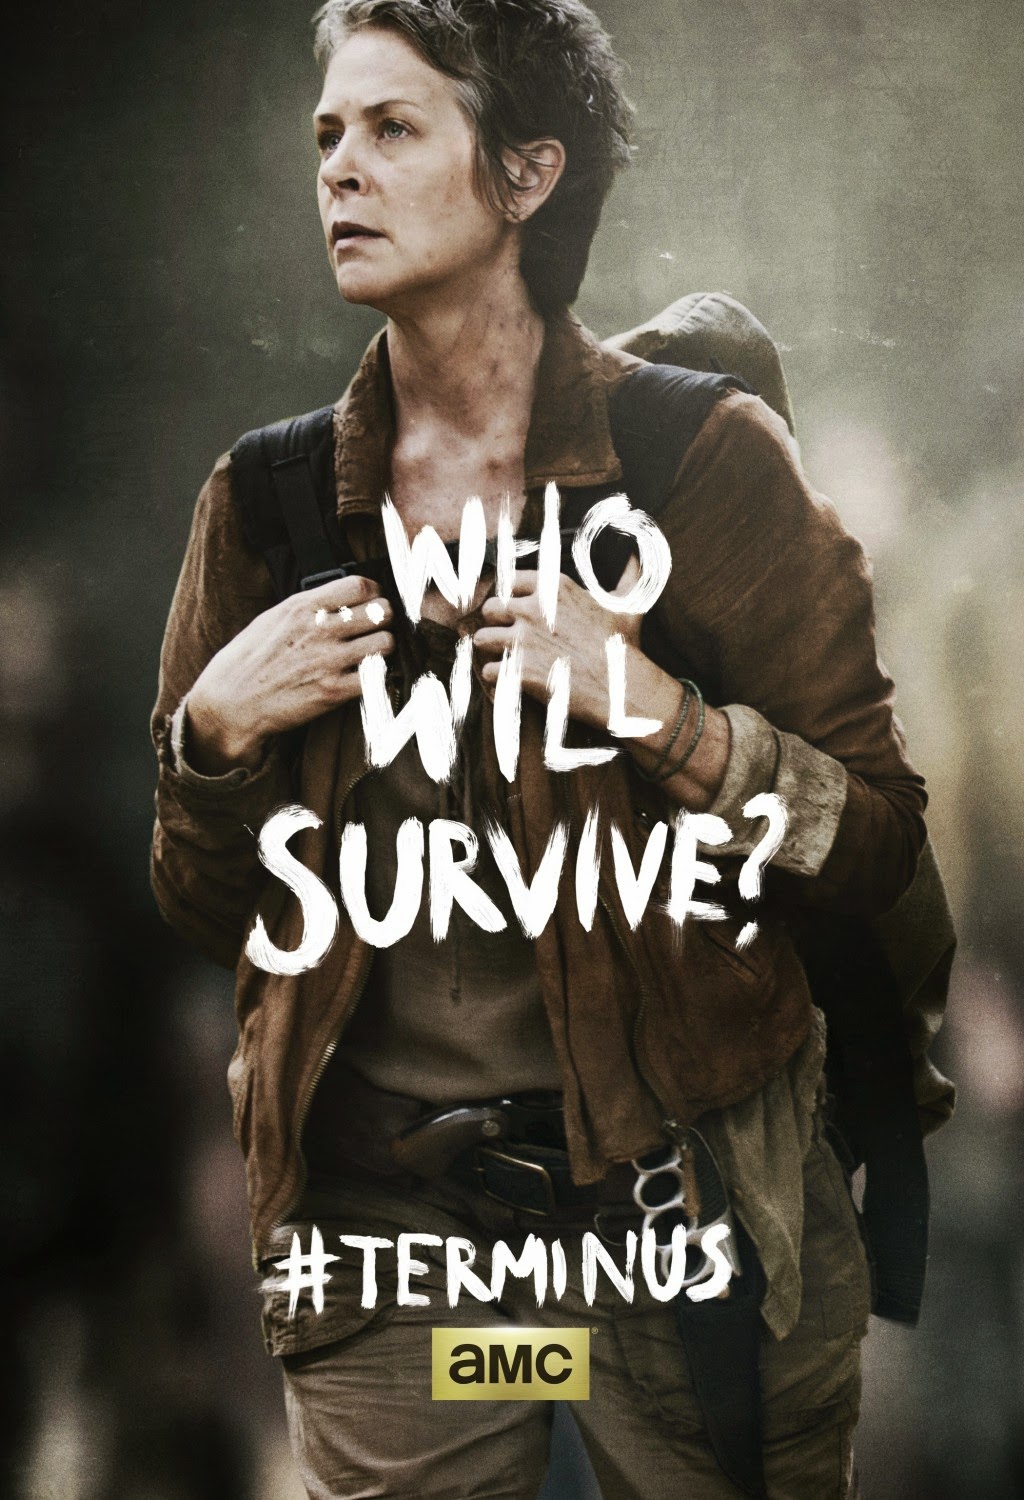 The Walking Dead Season 4 Finale “Terminus” One Sheet Television Posters - ...Who Will Survive? - Melissa McBride as Carol Peletier (with Judith Grimes)